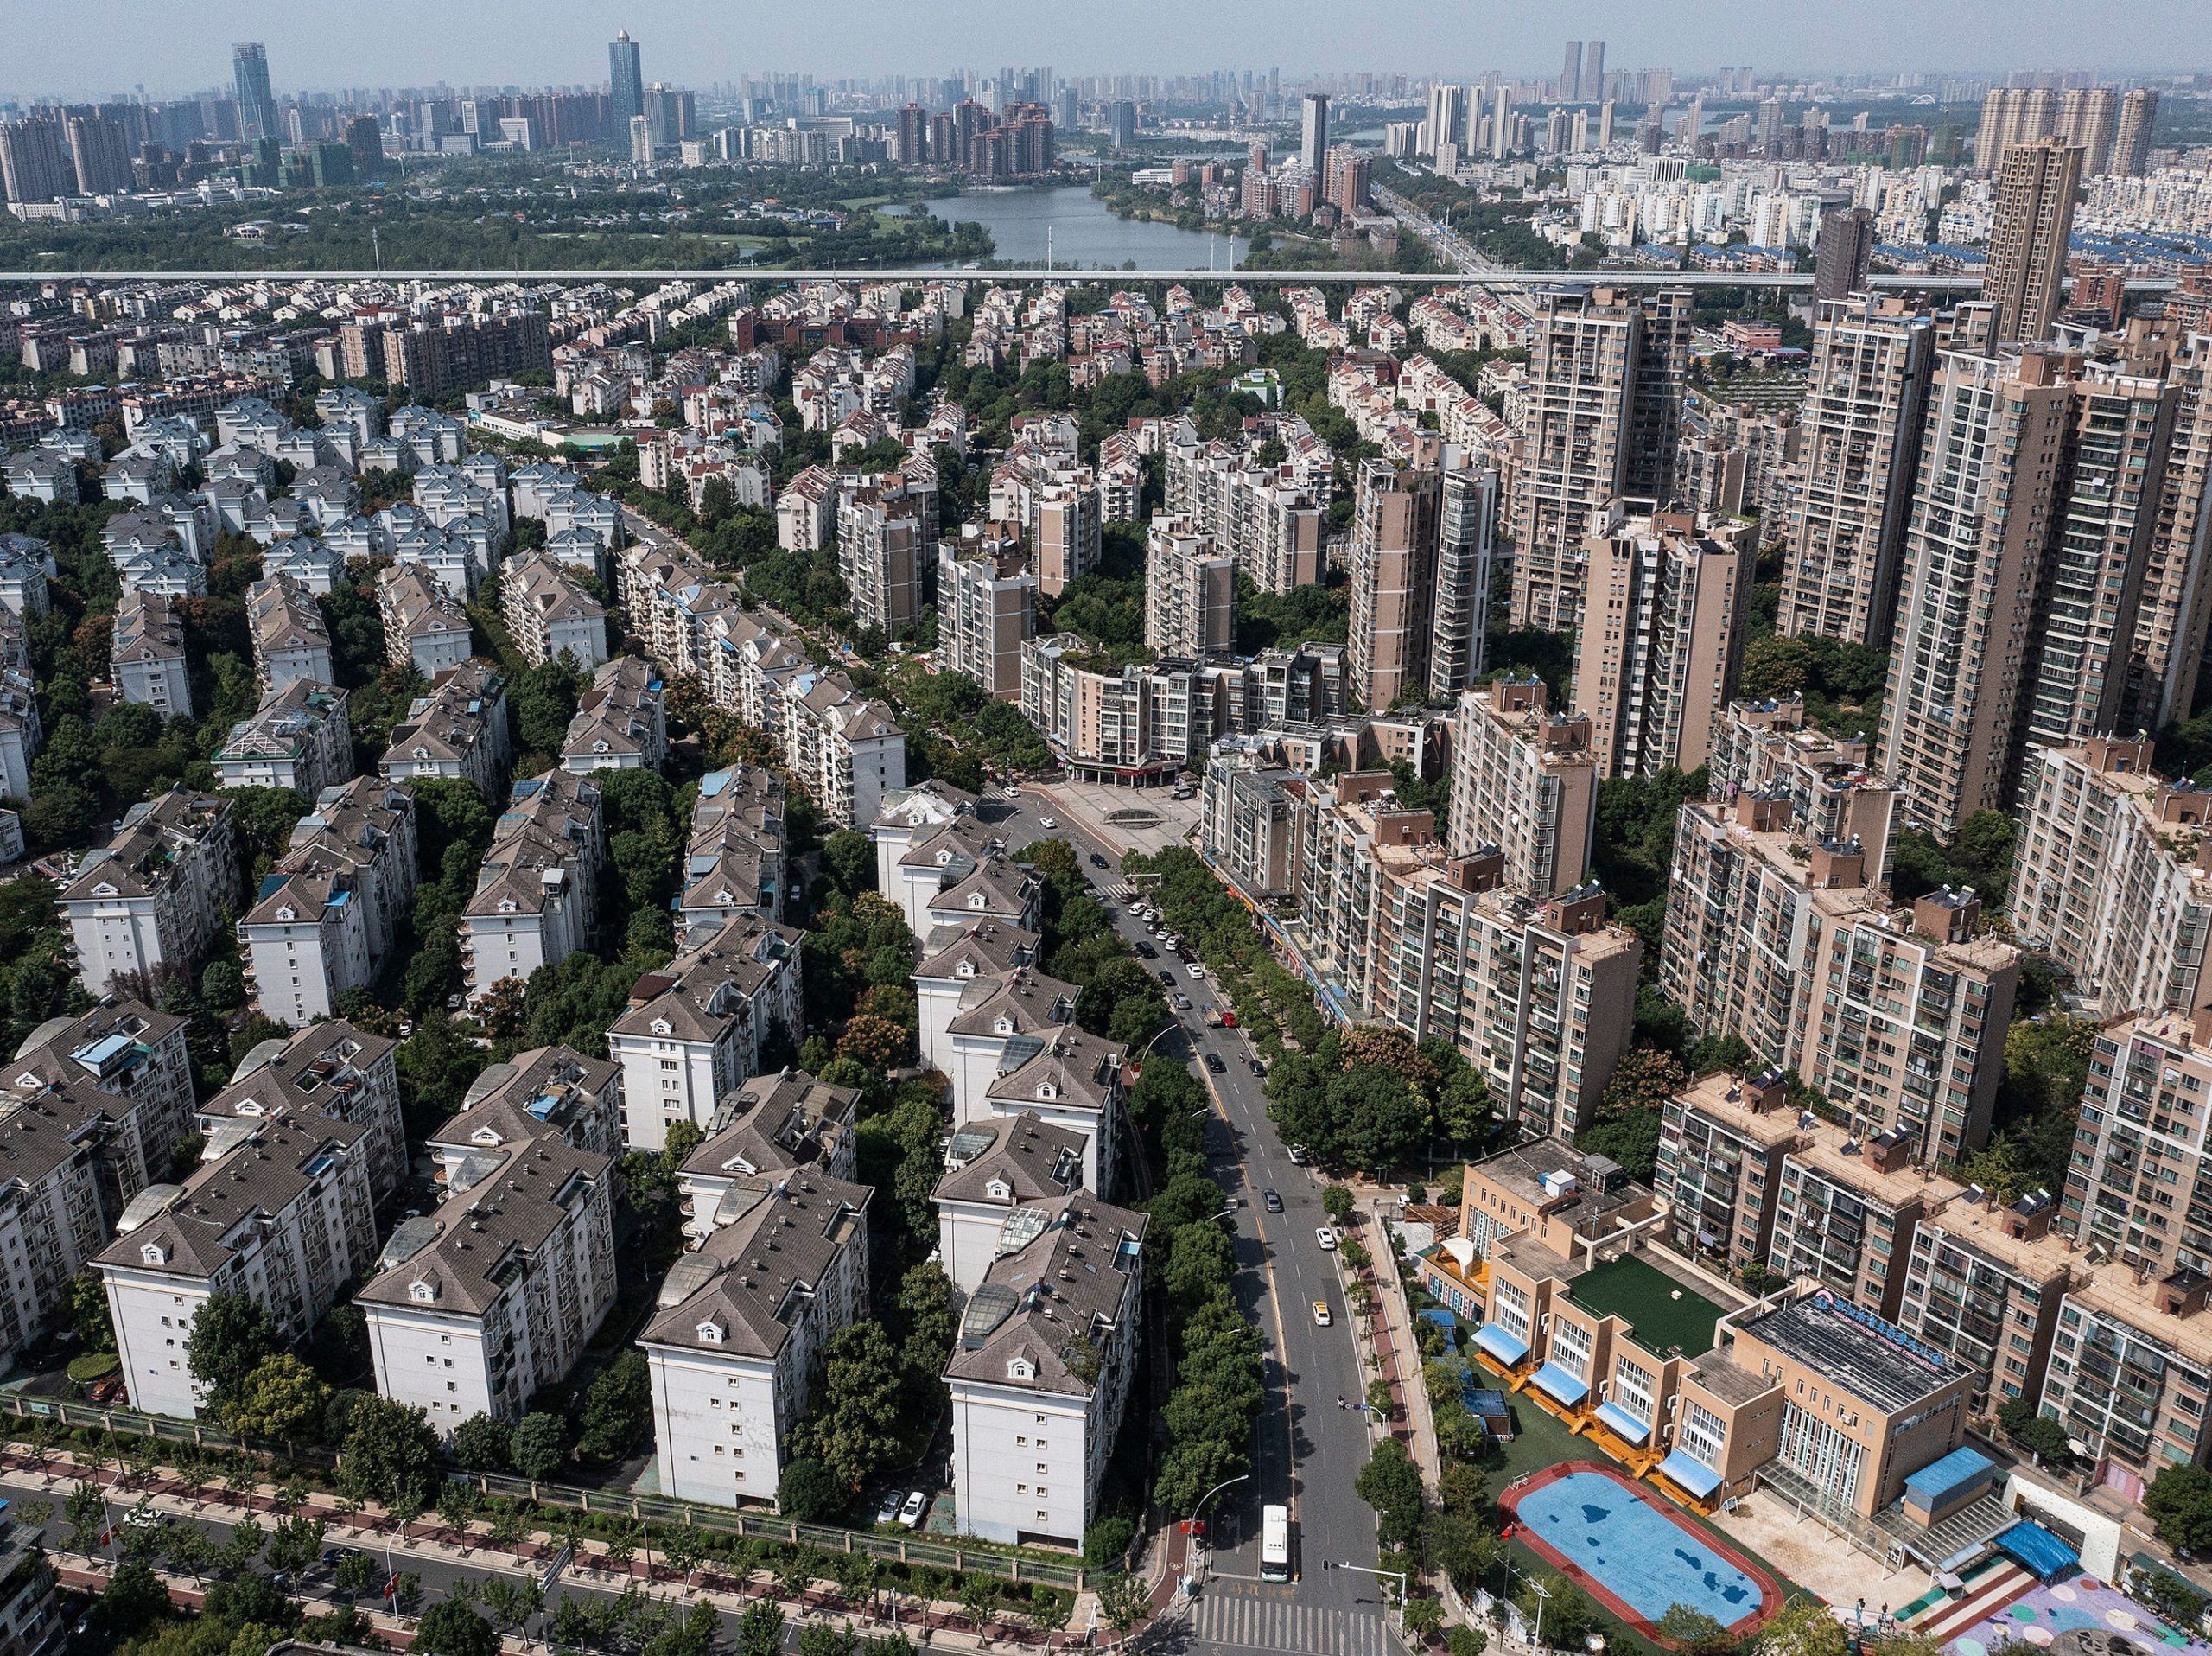 Aerial view of an Evergrande housing development in Wuhan, China